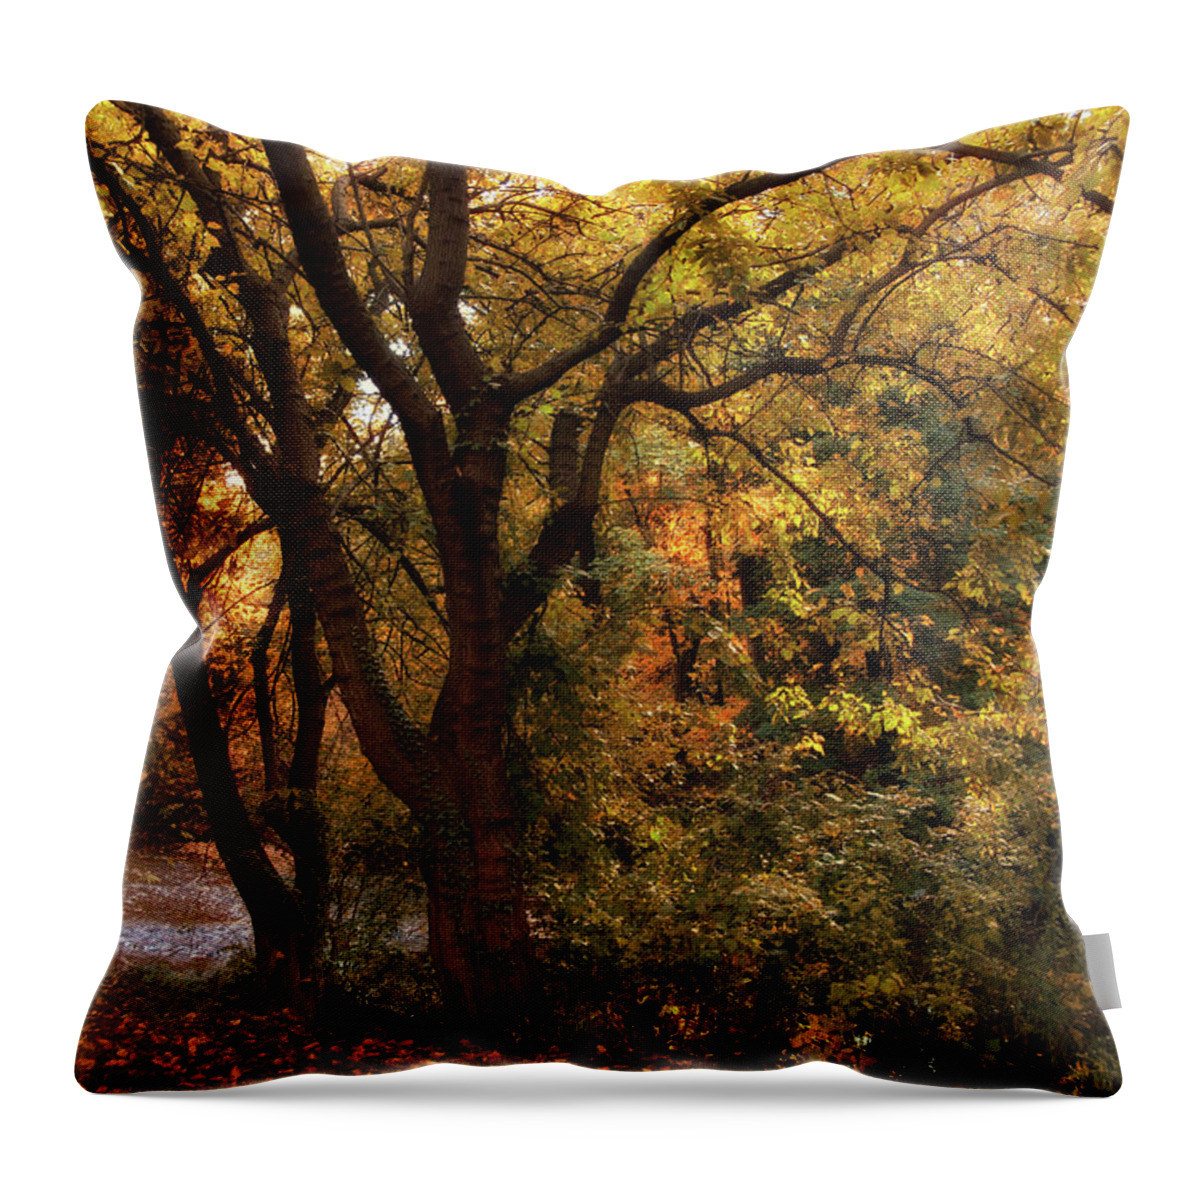 Autumn Throw Pillow featuring the photograph Autumn Glow #2 by Jessica Jenney